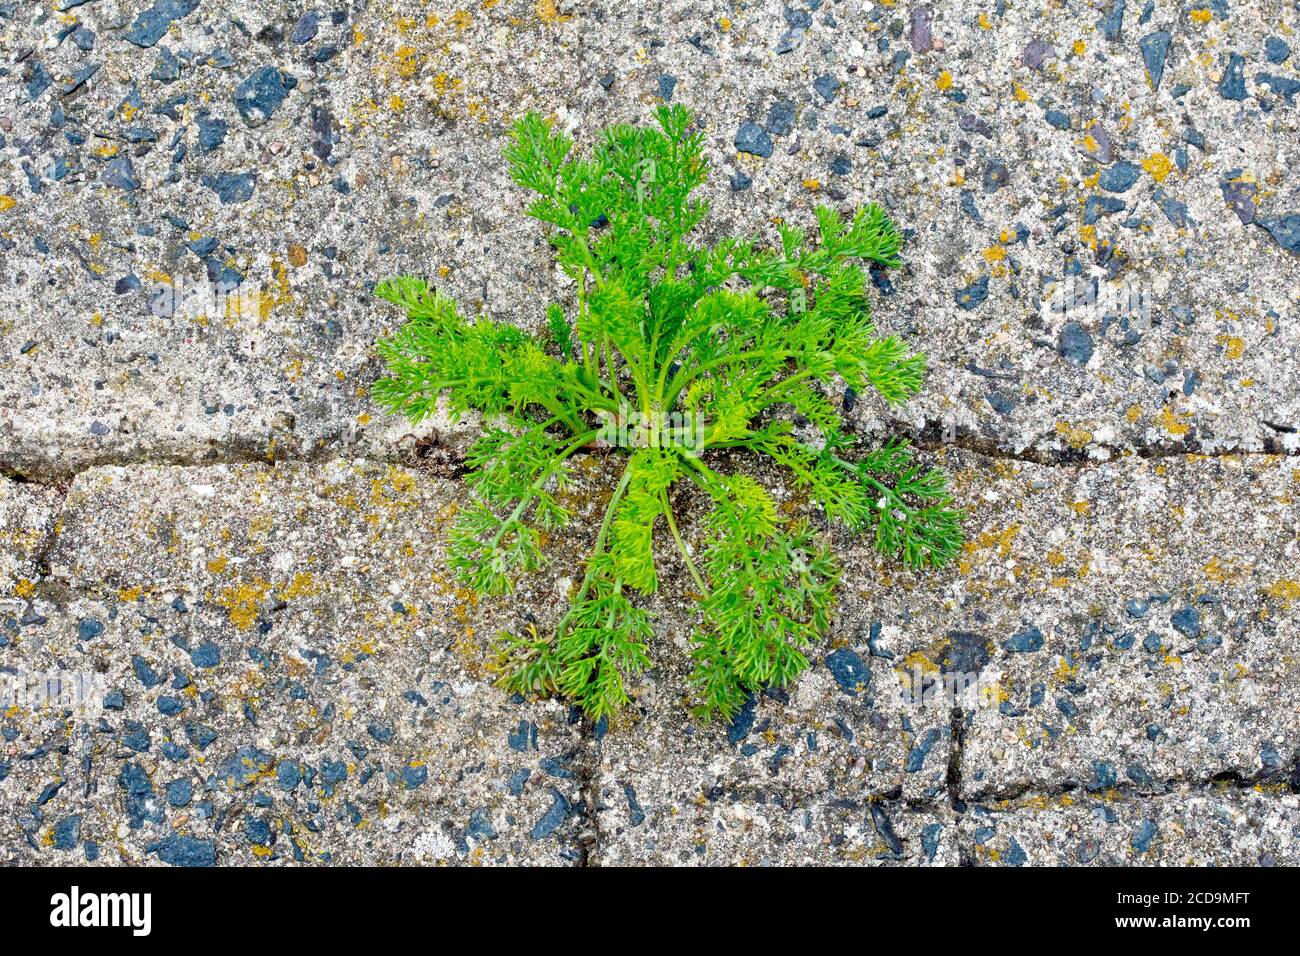 Close up of a Mayweed plant (tripleurospermum, matricaria) sprouting from a crack in the concrete sea defences along the shore. Stock Photo